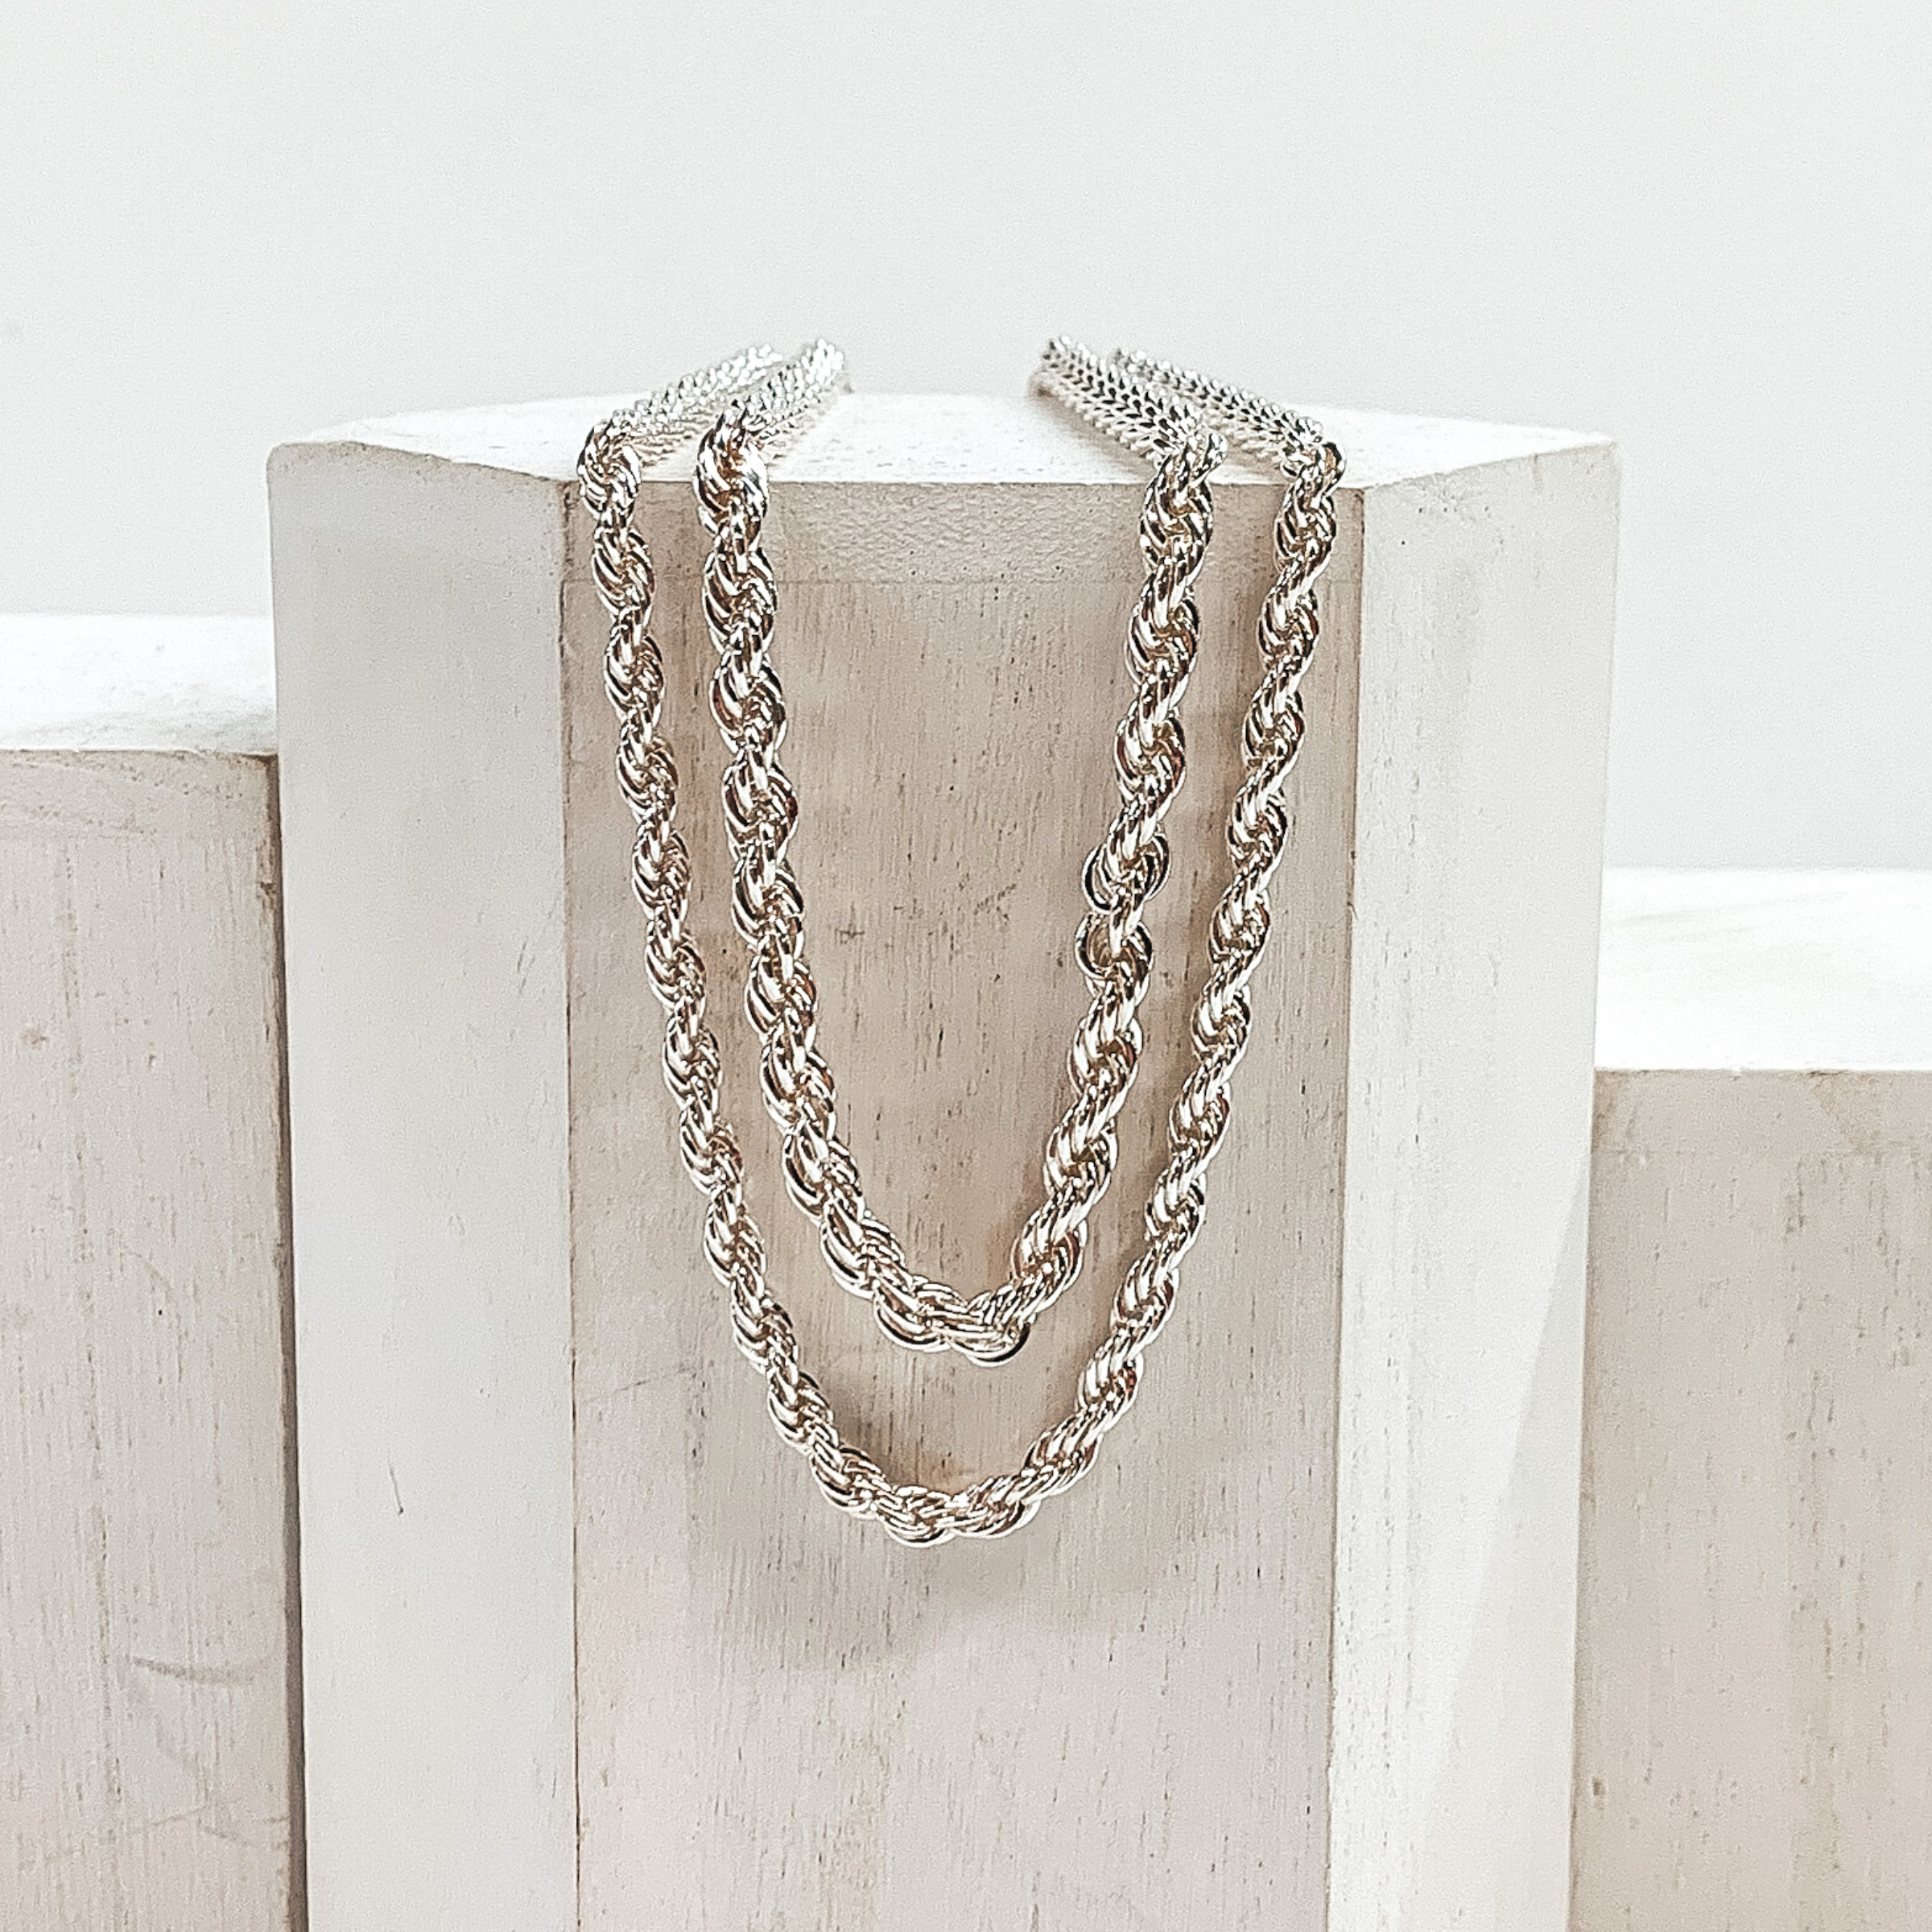 Two, silver, rope chain necklaces. This set includes a shorter and a longer necklace. This necklace is pictured laying on a white block on a white background.